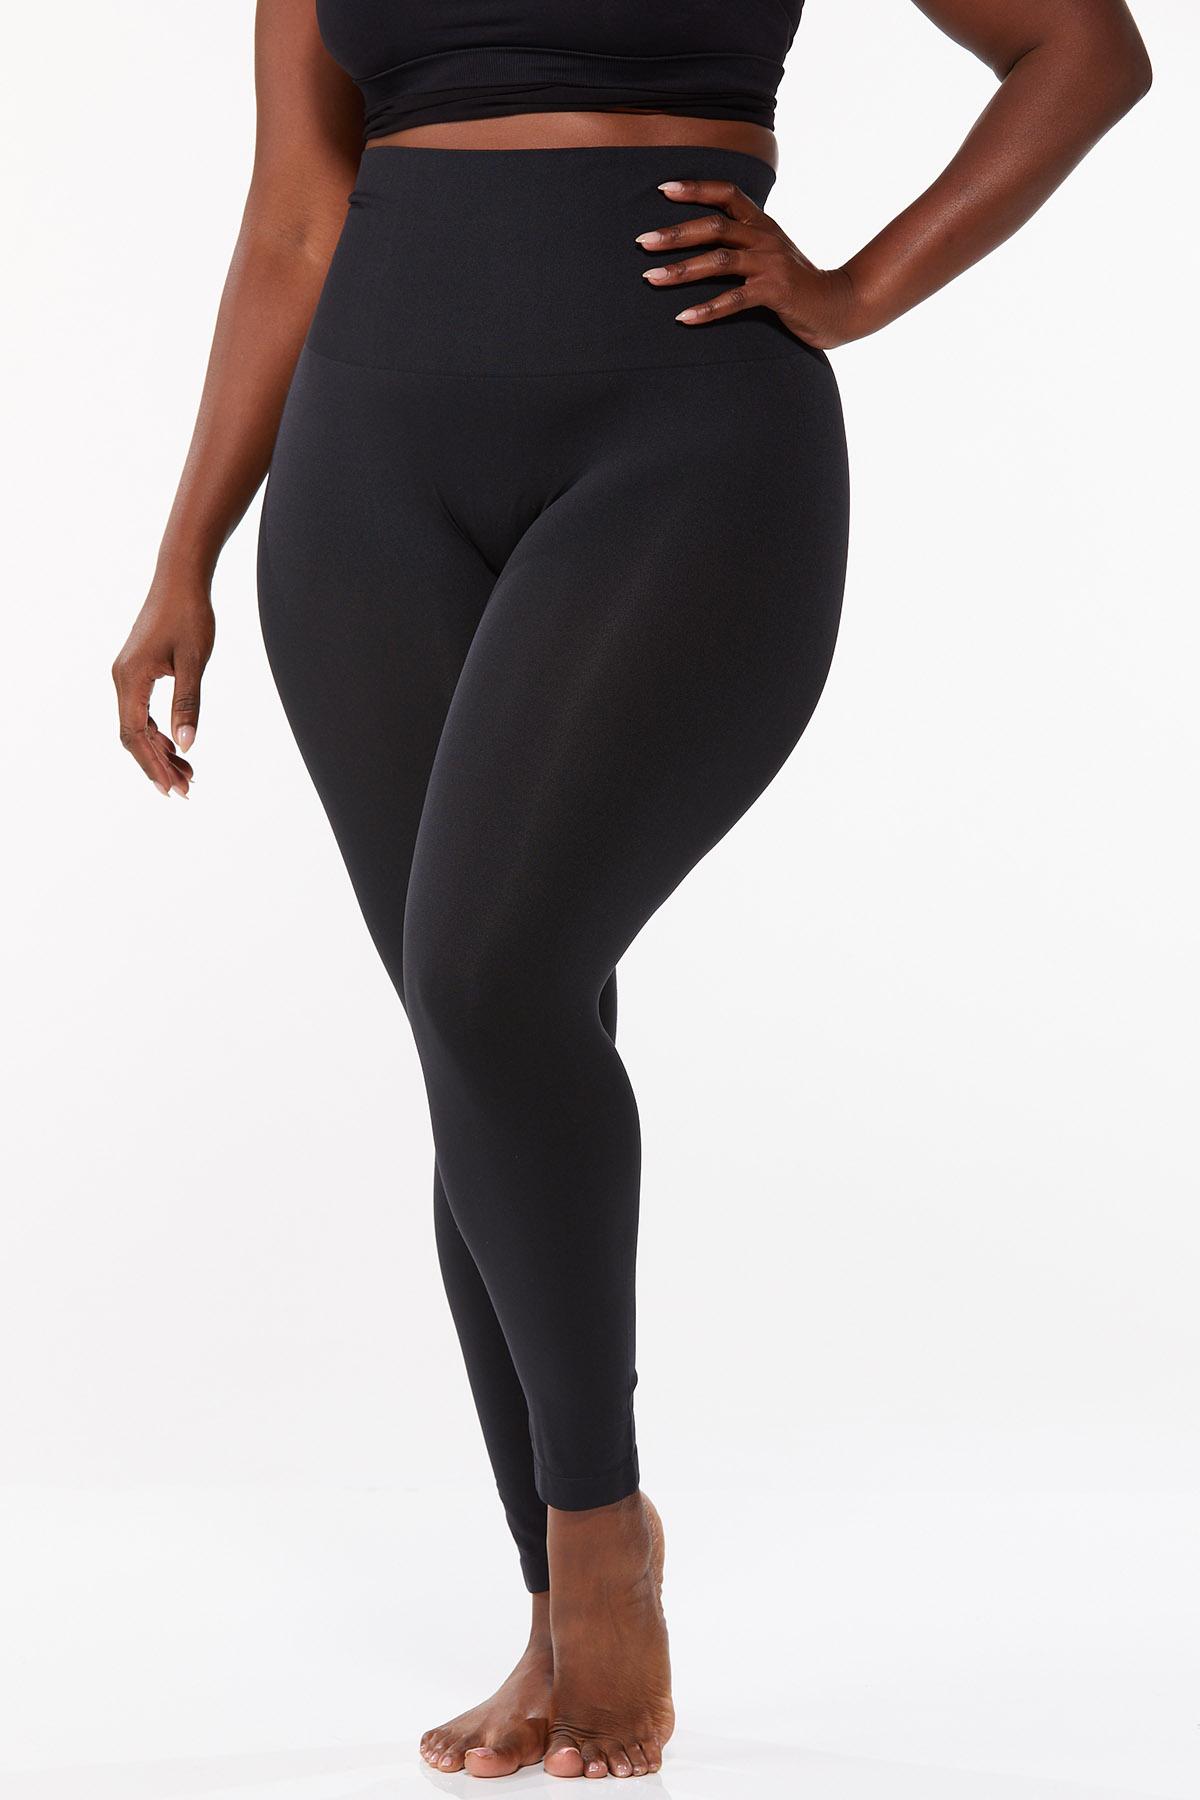 Leggings Plus size/XL-2XL/Black Collection/Branded/Garterize/Cotton,  Women's Fashion, Bottoms, Other Bottoms on Carousell